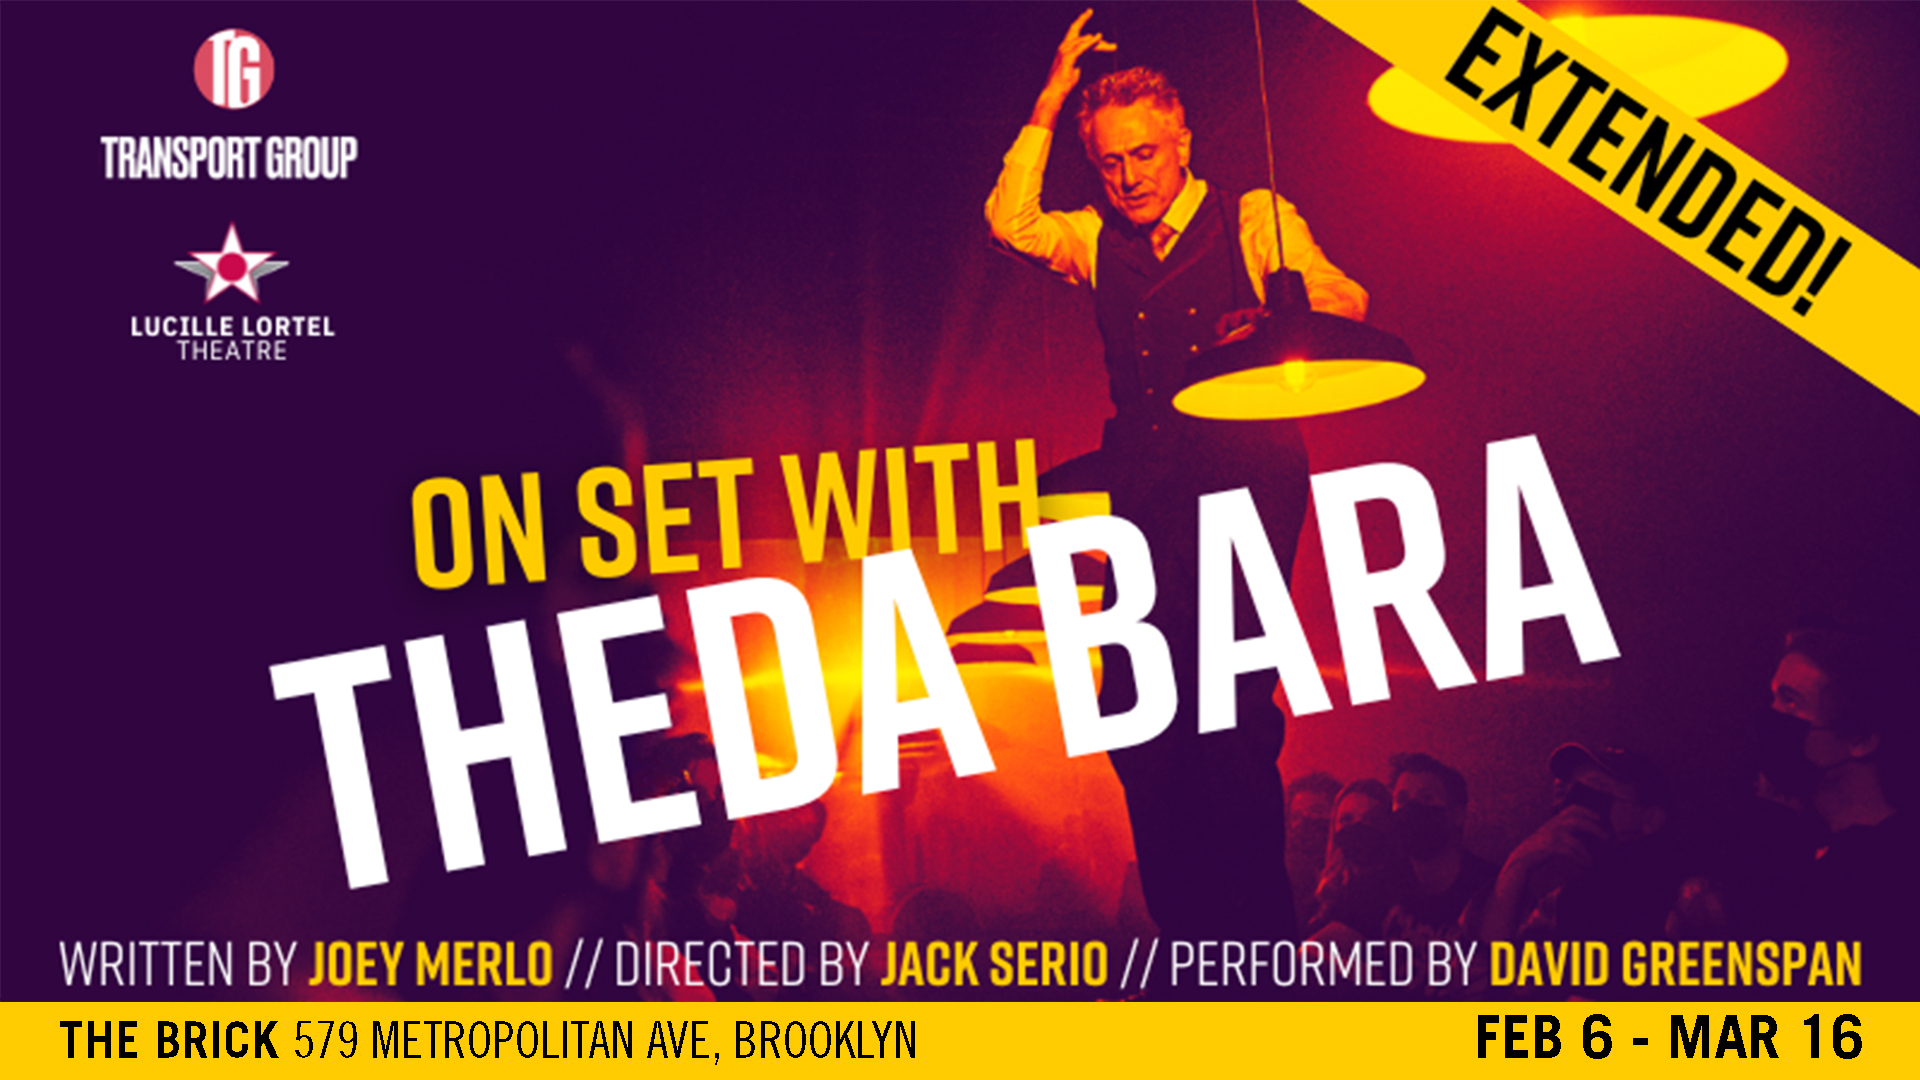 On Set With Theda Bara has been extended until March 16th. Book tickets at The Brick